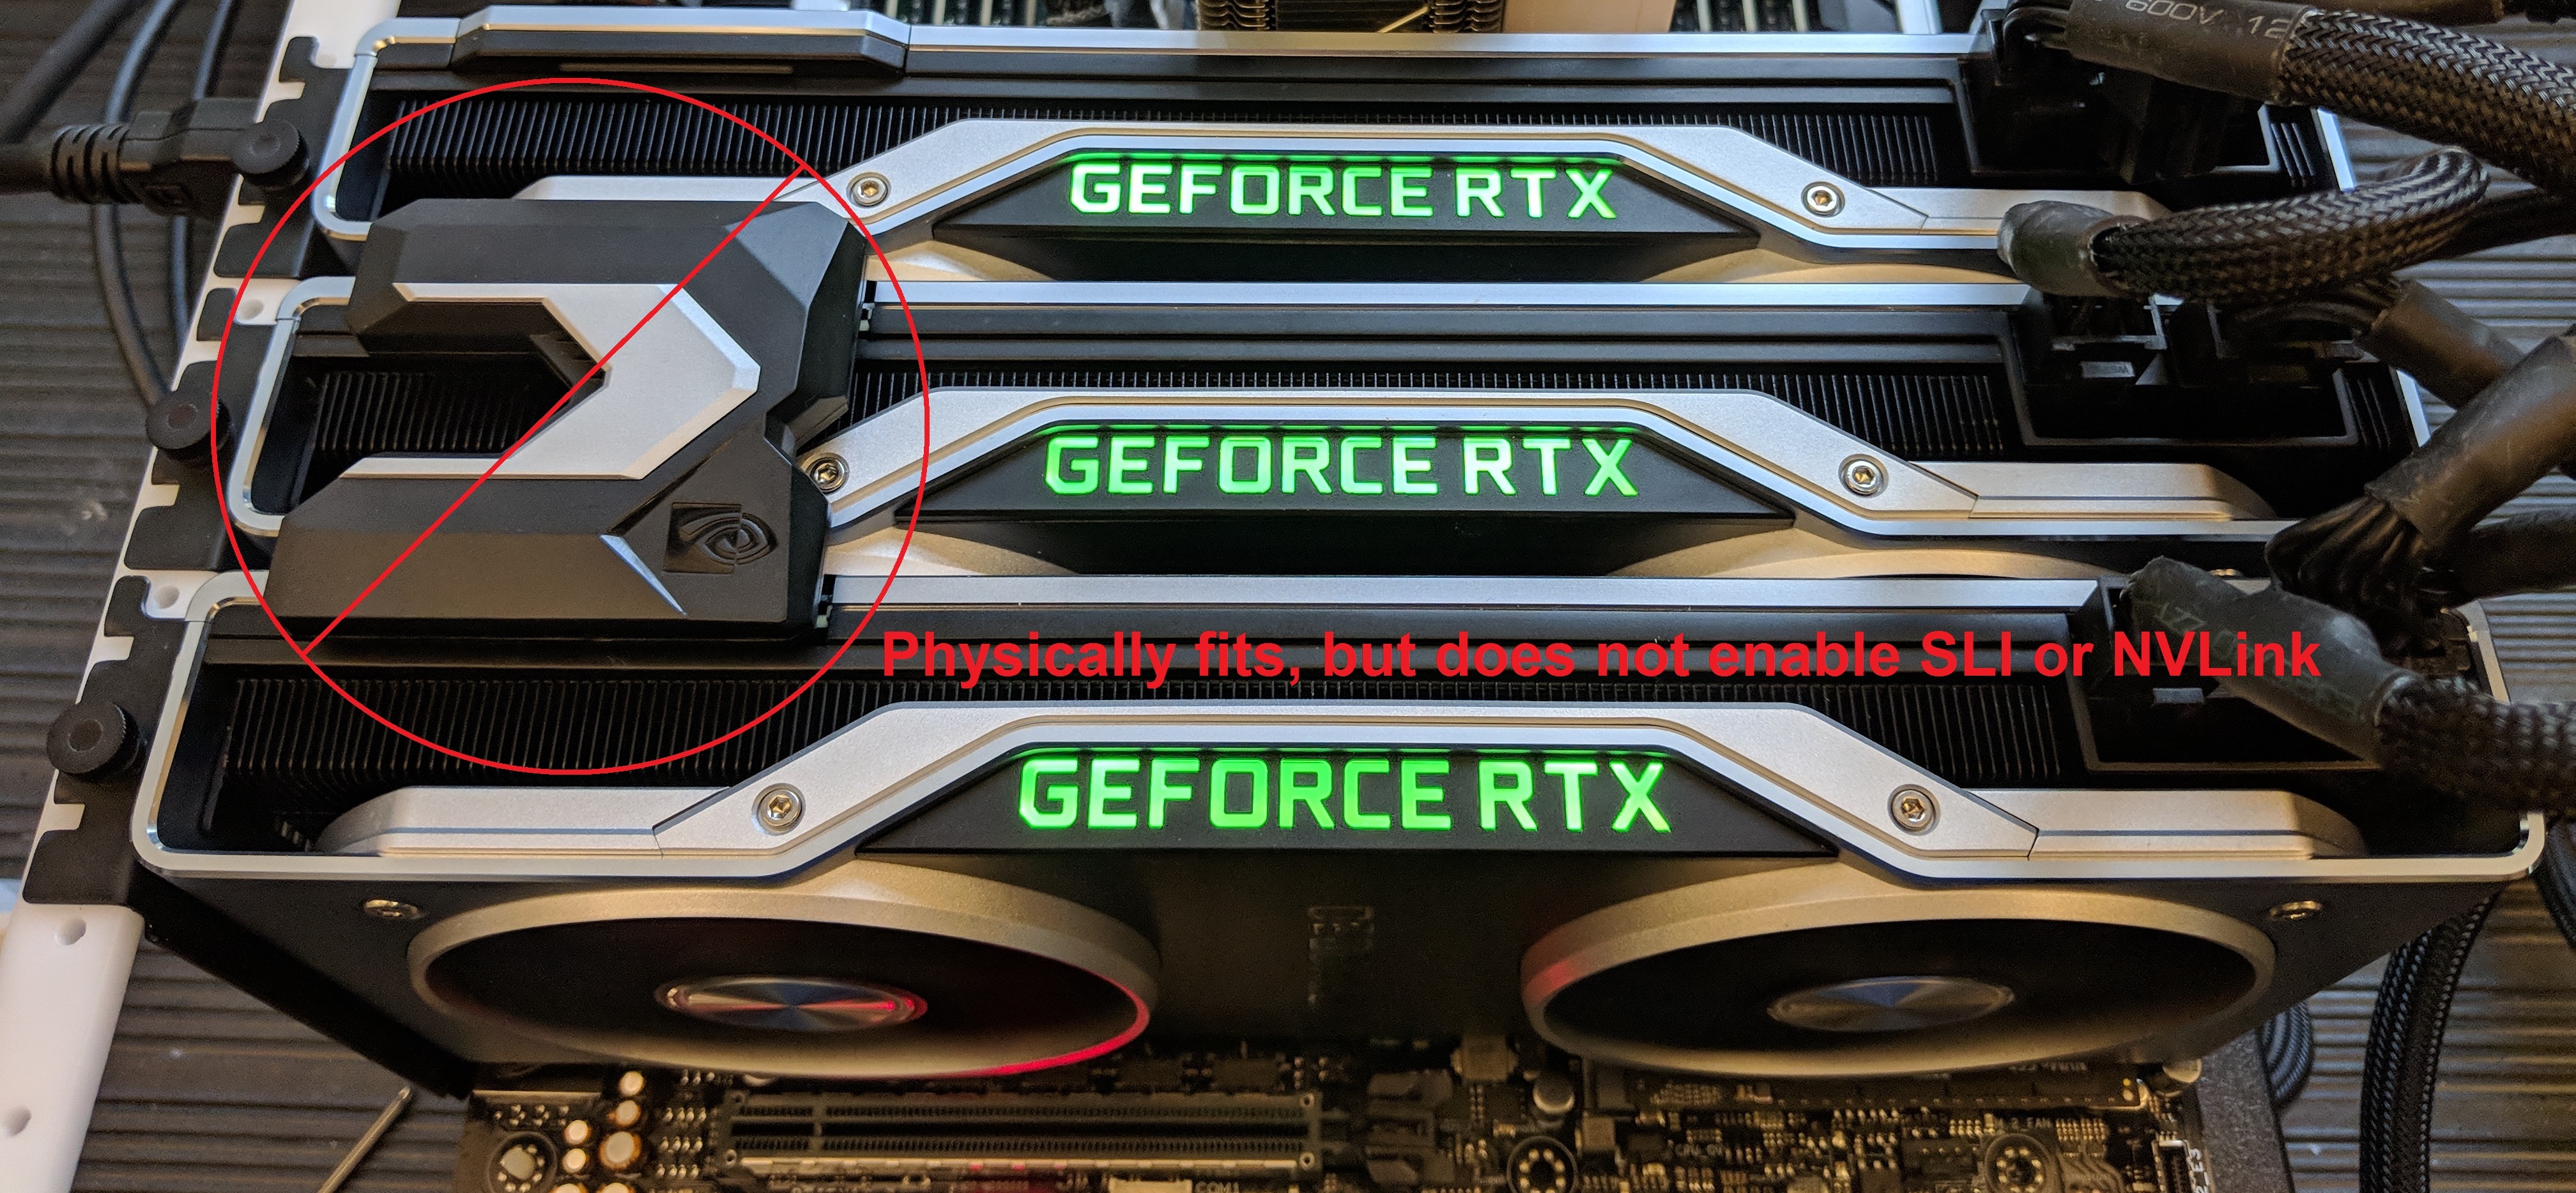 Dual NVIDIA GeForce RTX 2080 Cards with a Quadro NVLink Bridge Installed - Which Does Not Function